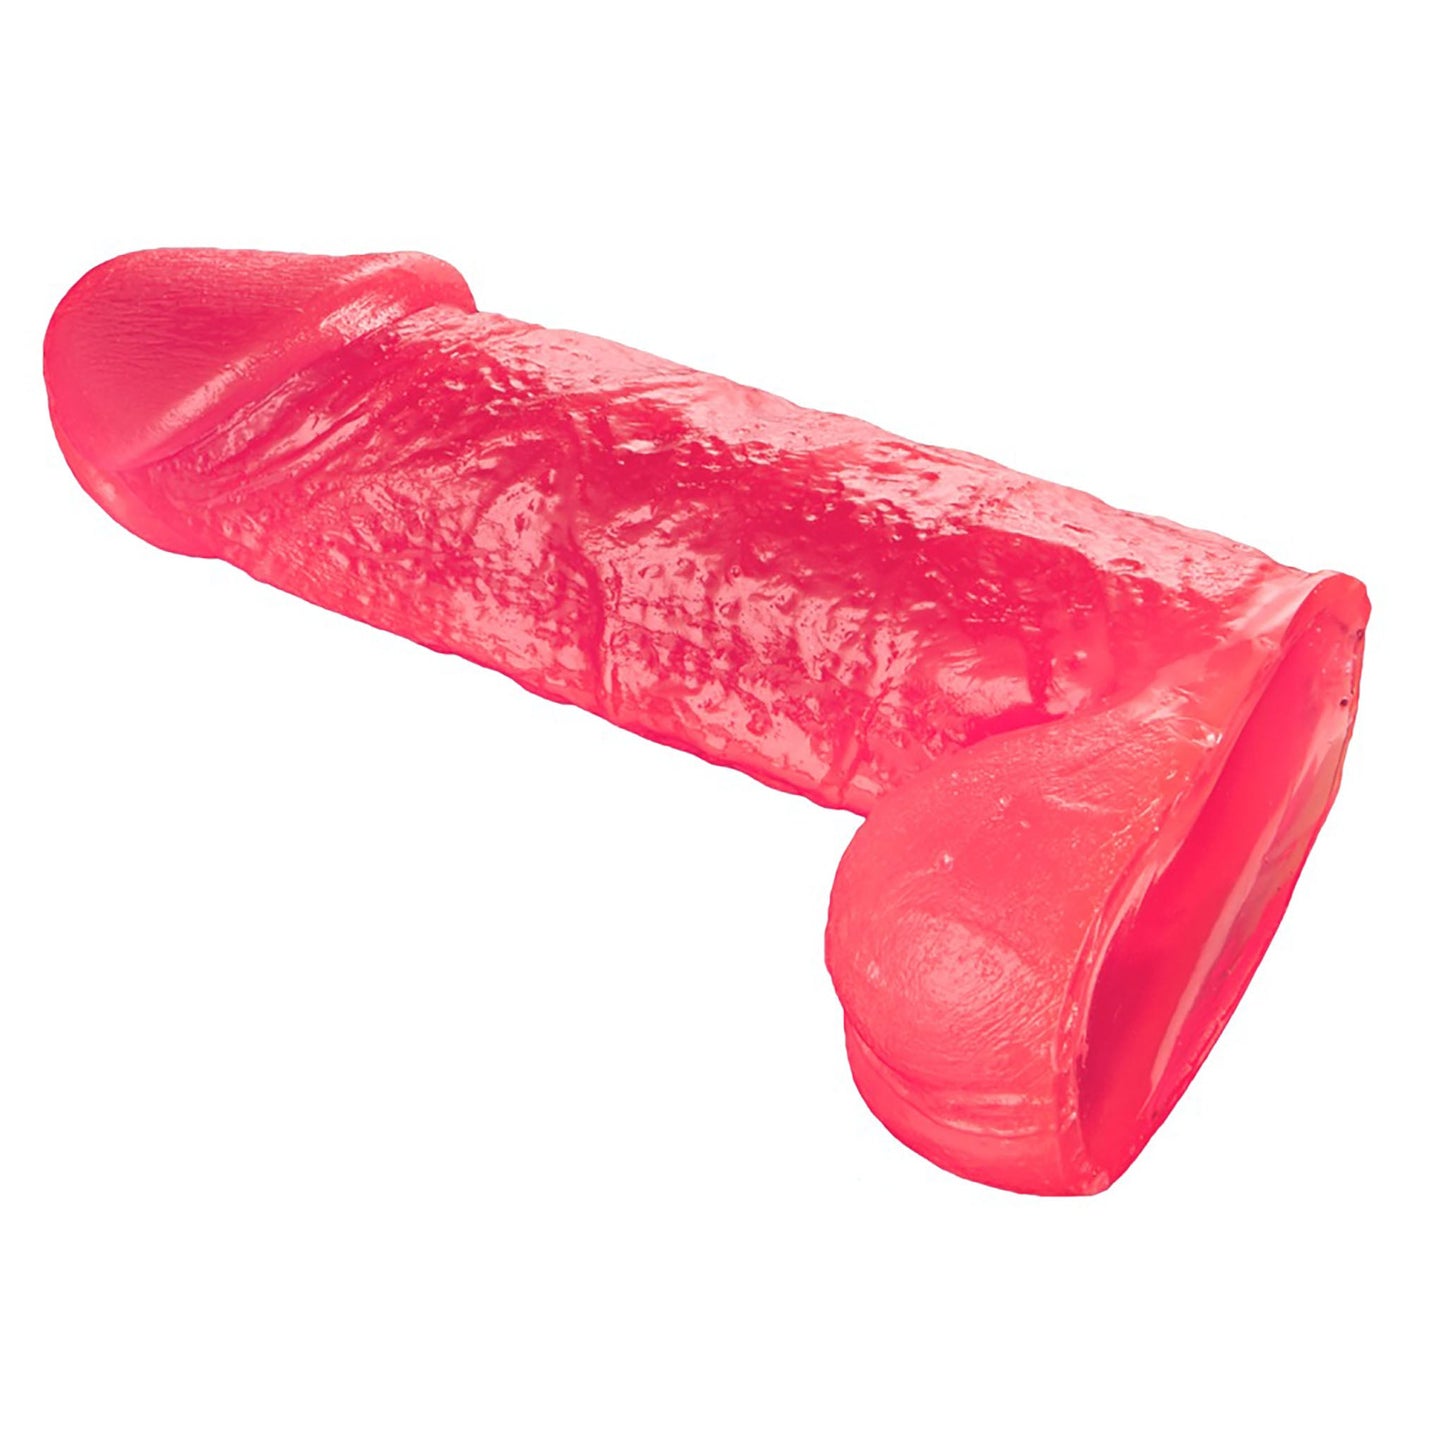 Small Dong von you 2 toys, kleiner roter Dildo, Hoden frontal